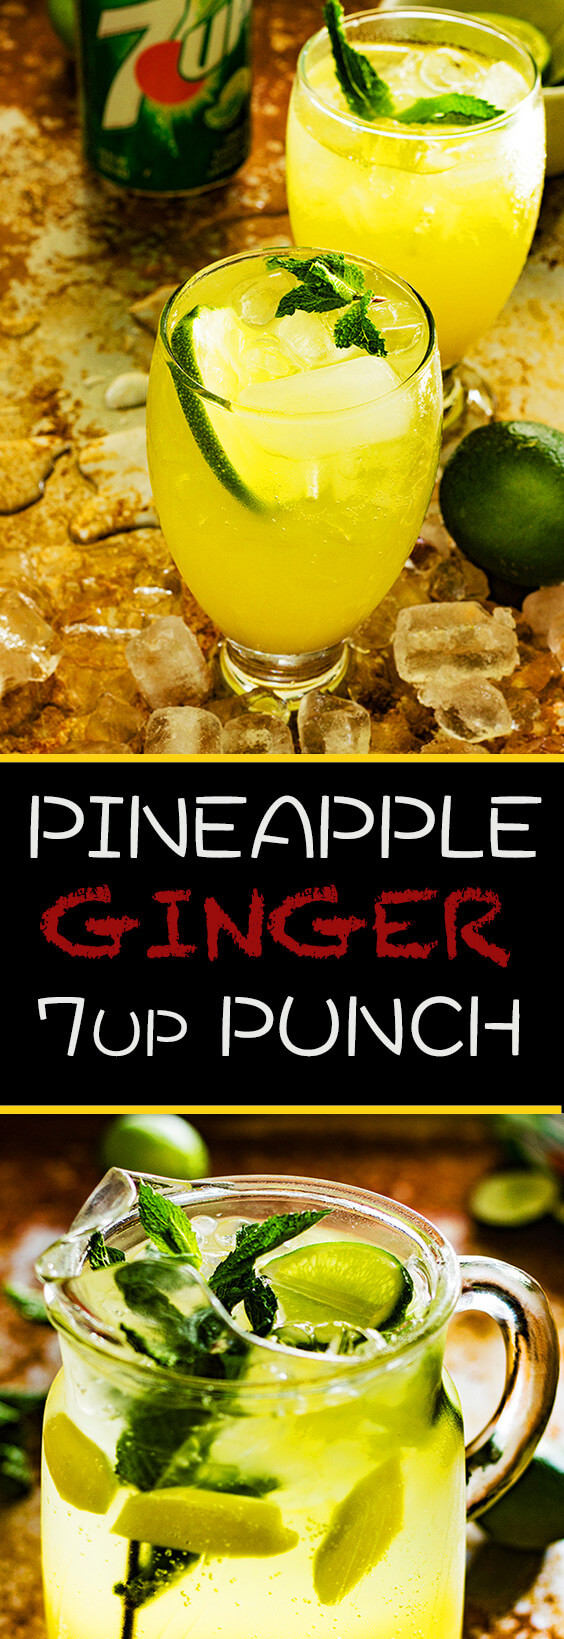 Pineapple Ginger 7up Punch - Cooking Maniac